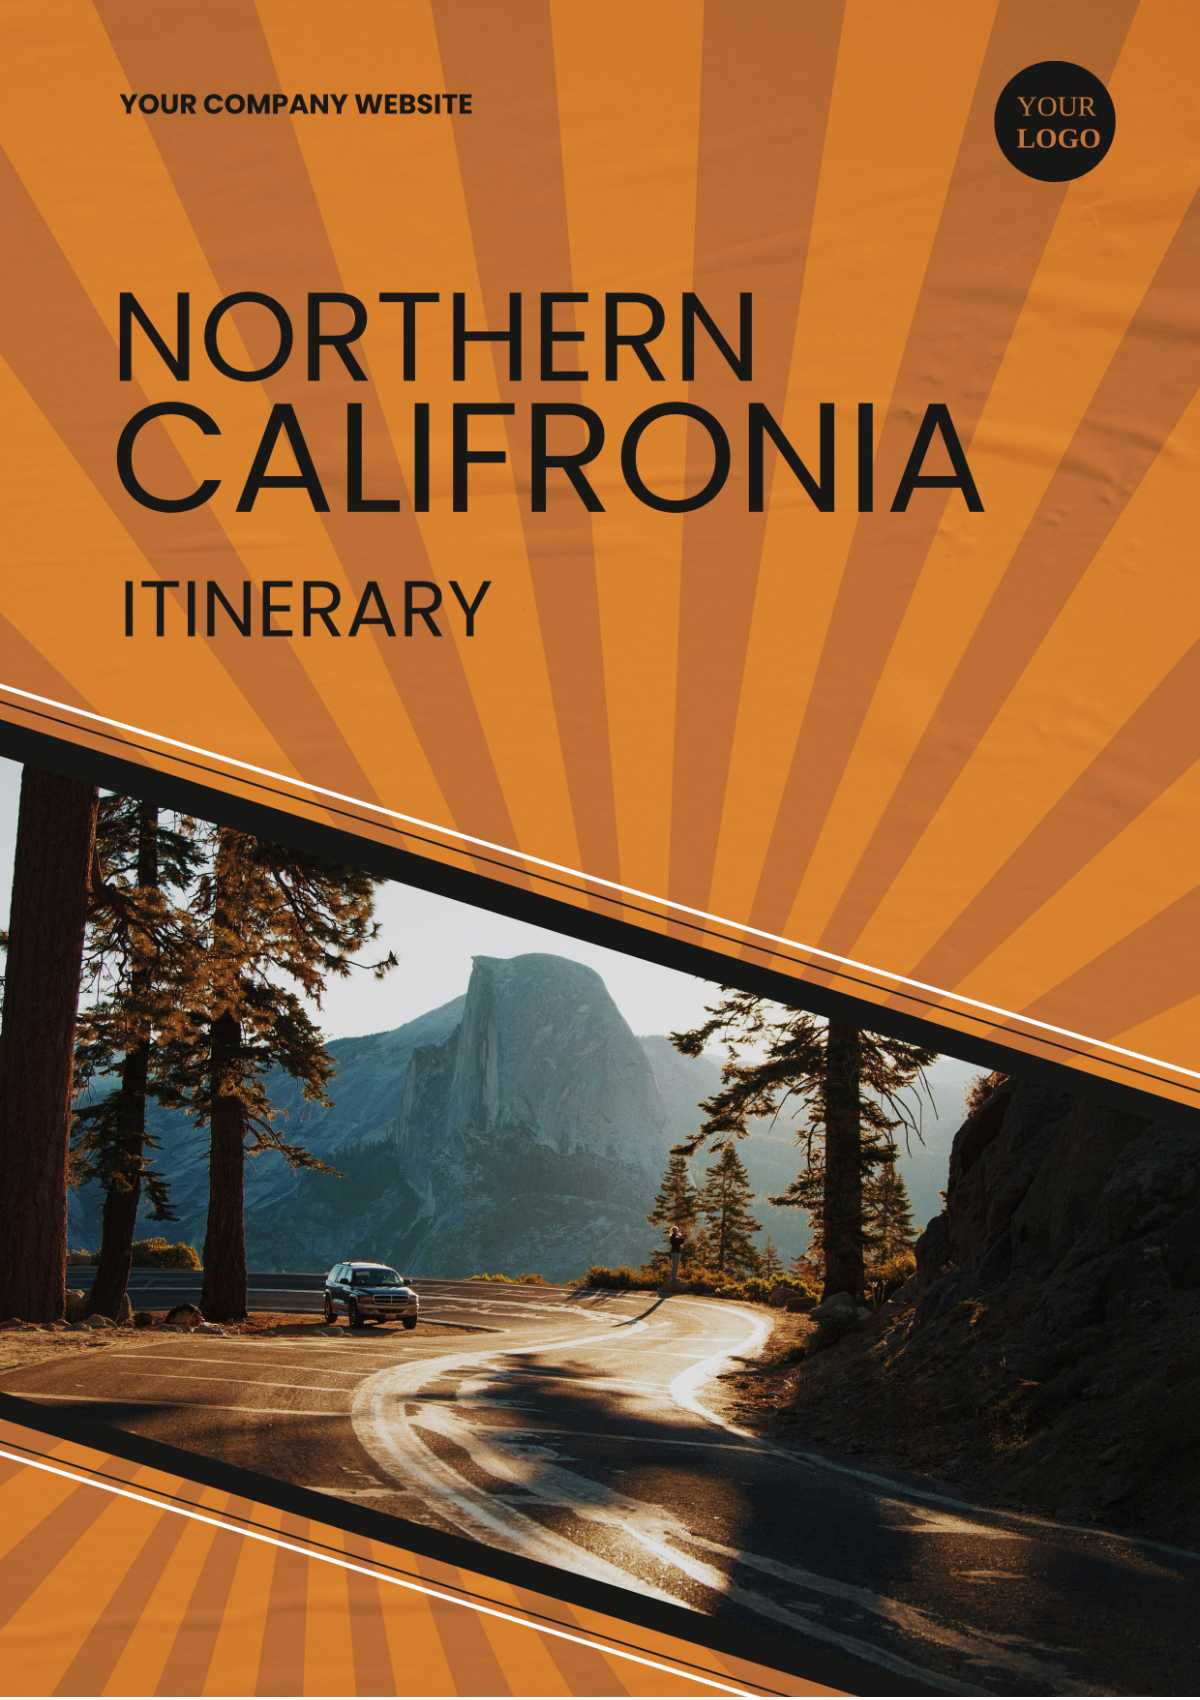 Northern California Trip Itinerary Template